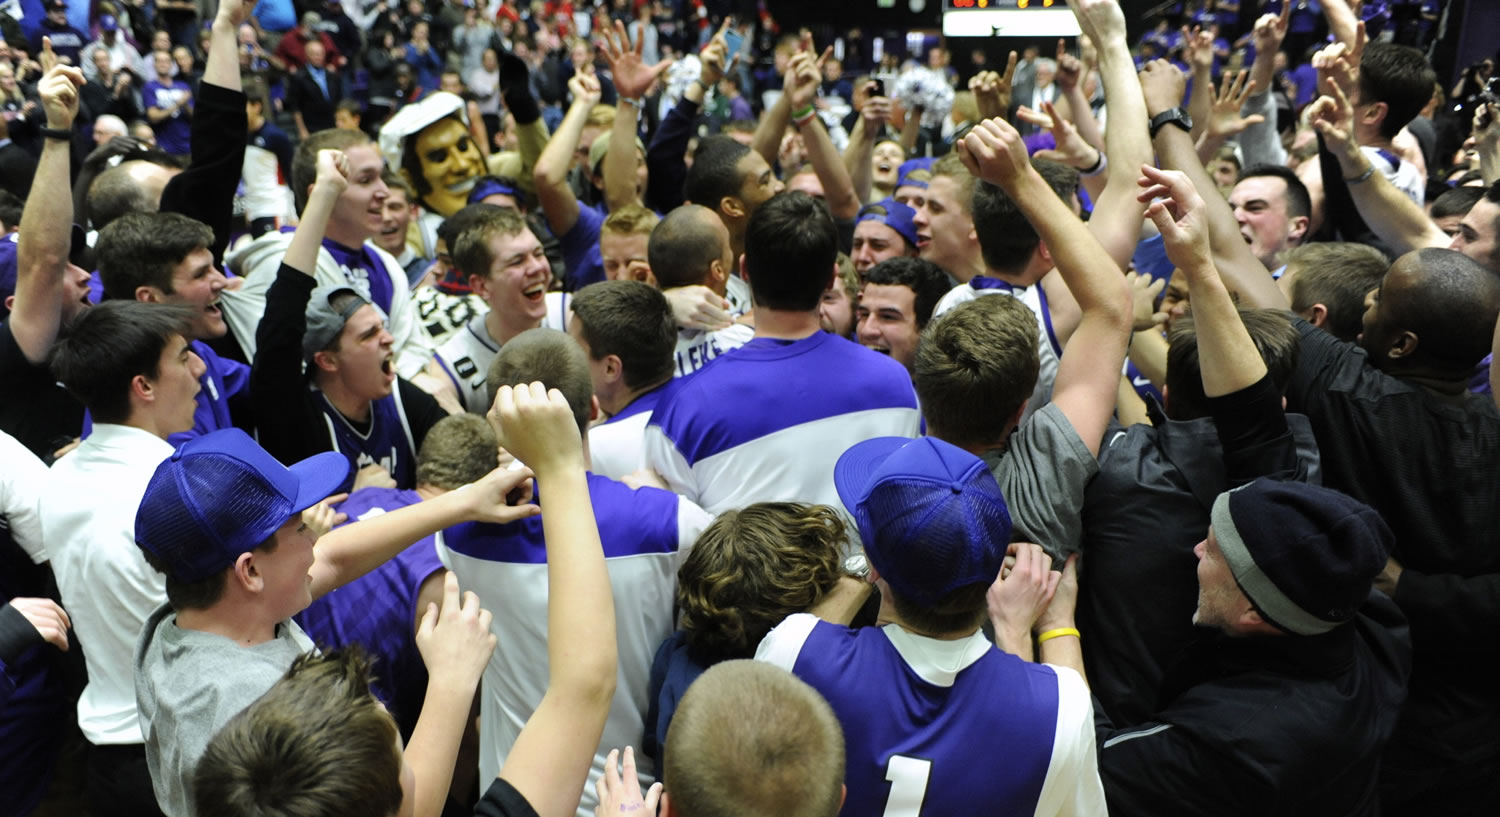 Players and fans celebrate at mid court after the Portland Pilots beat the Gonzaga Bulldogs 82-73 in a West Coast Conference game at the Chiles Center on Thursday.